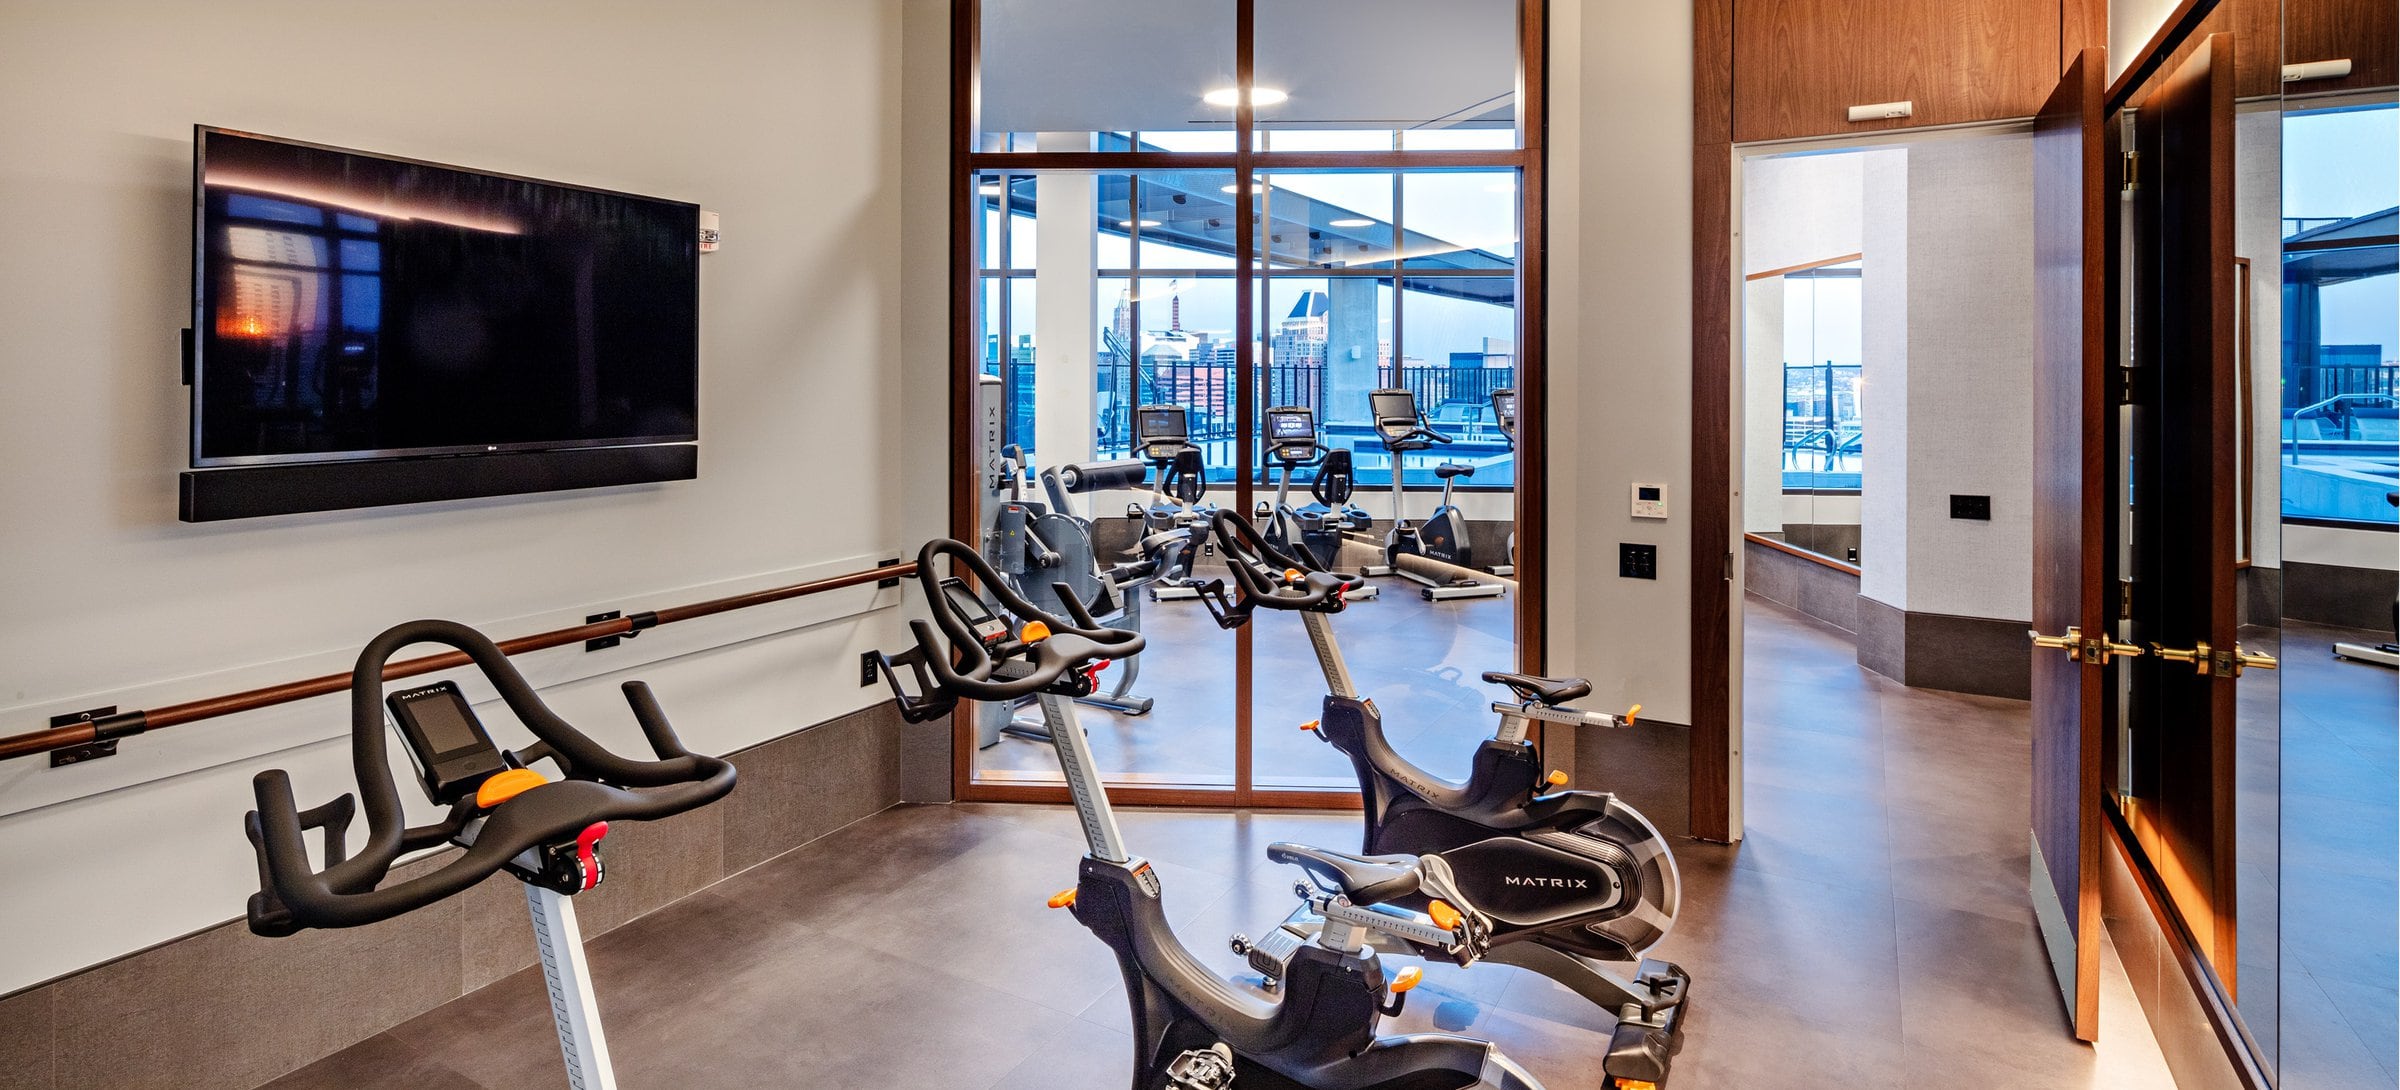 Fitness studio with spin bikes and virtual fitness programming